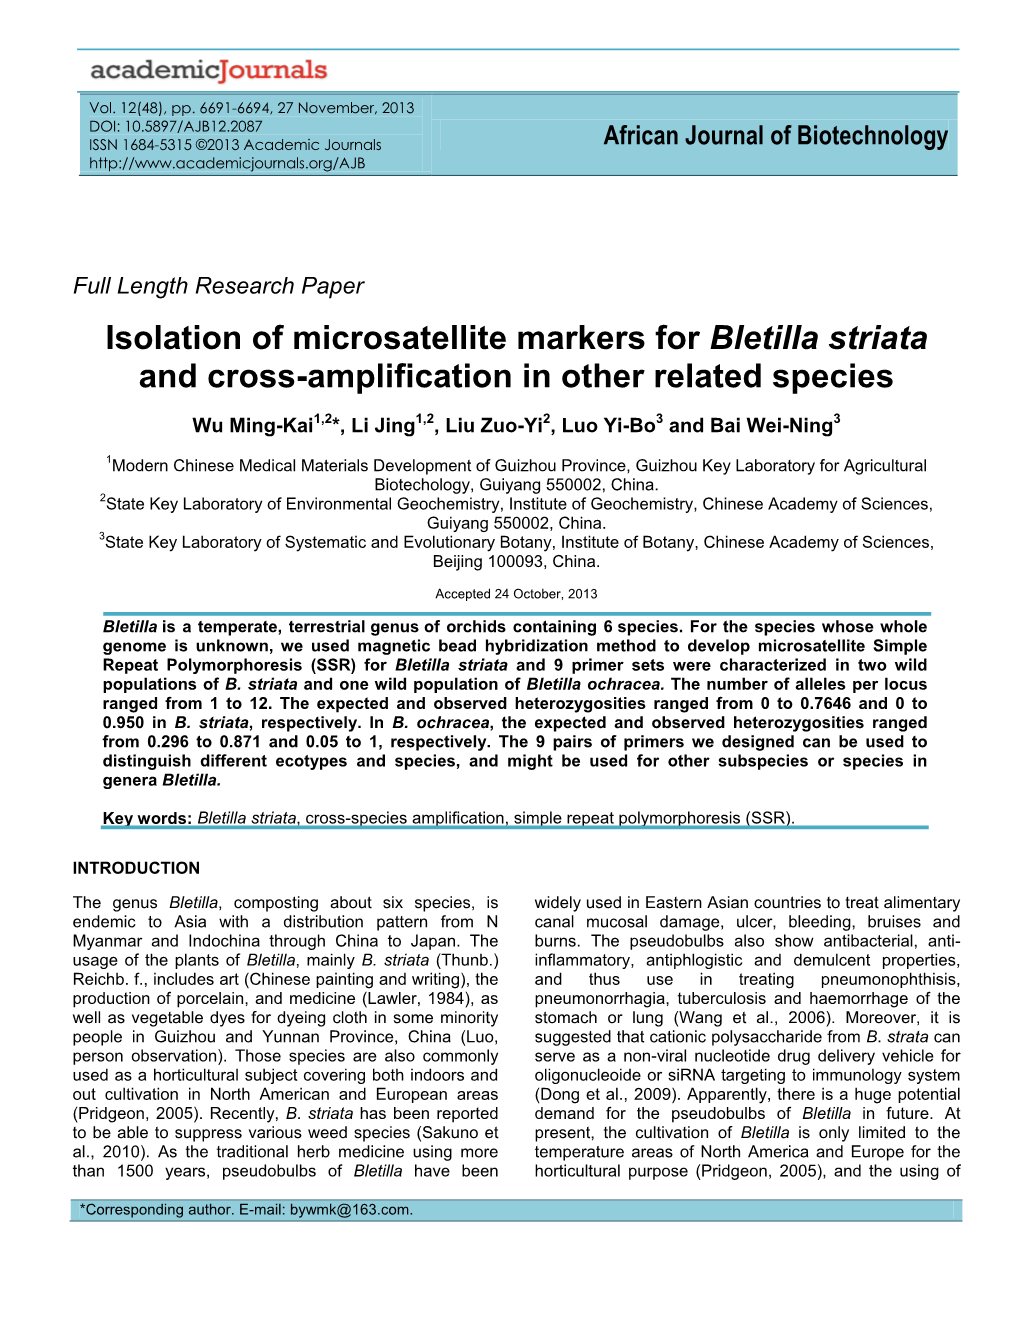 Isolation of Microsatellite Markers for Bletilla Striata and Cross-Amplification in Other Related Species